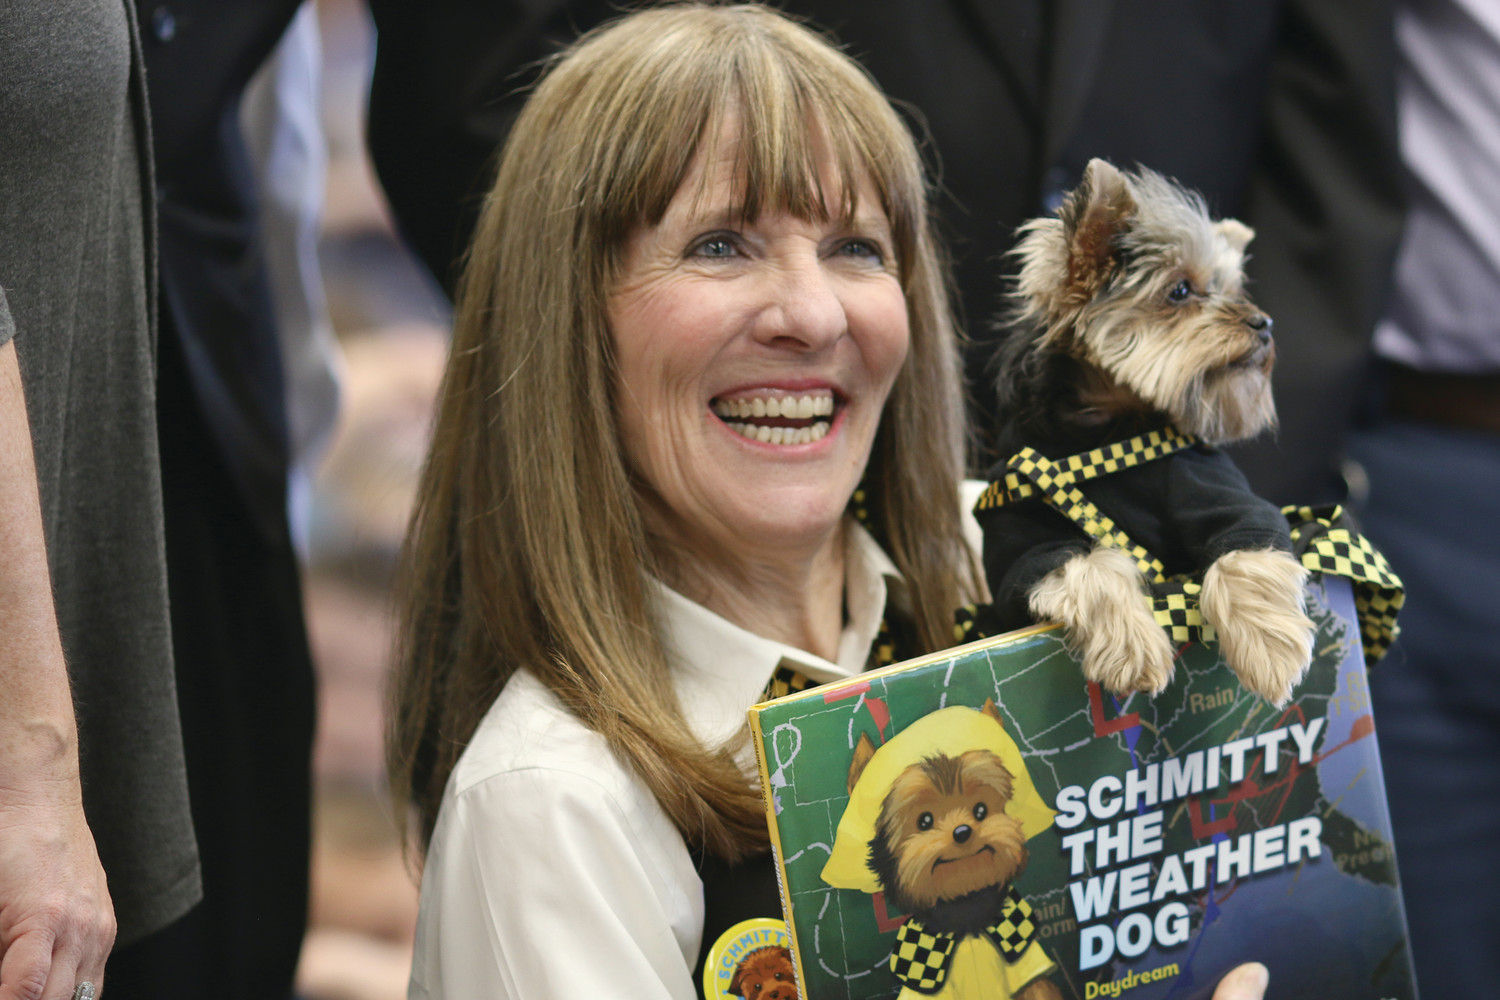 Holding her children’s book named after her beloved pup, Schmitty The Weather Dog, author Elly McGuire, smiles after reading to the students of St. Kevin School in Warwick on Thursday, March 1.